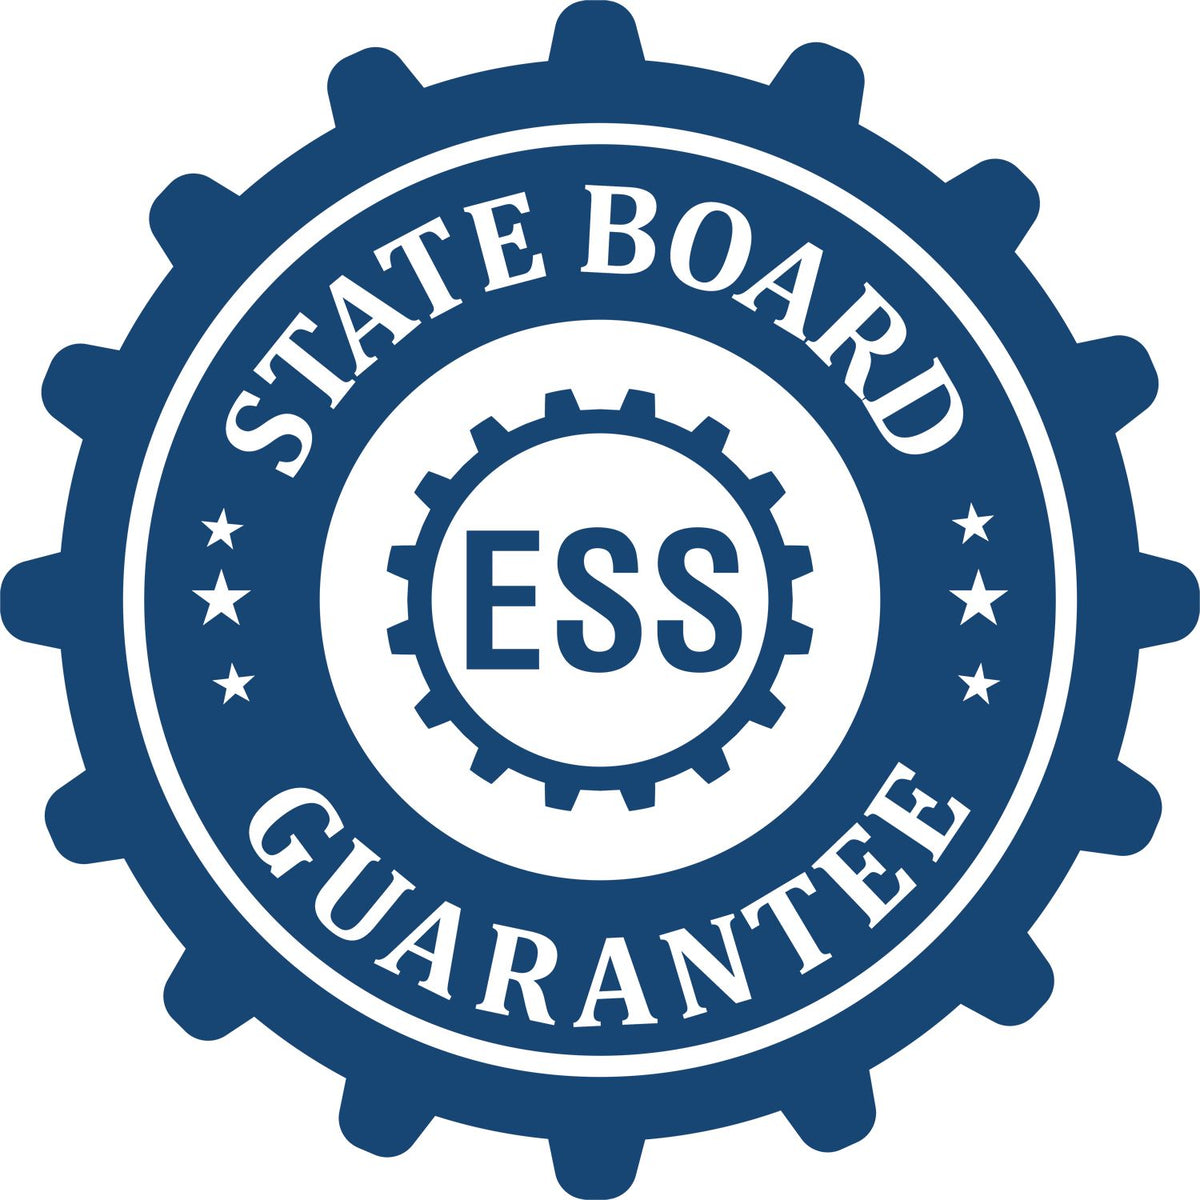 An emblem in a gear shape illustrating a state board guarantee for the State of Vermont Extended Long Reach Geologist Seal